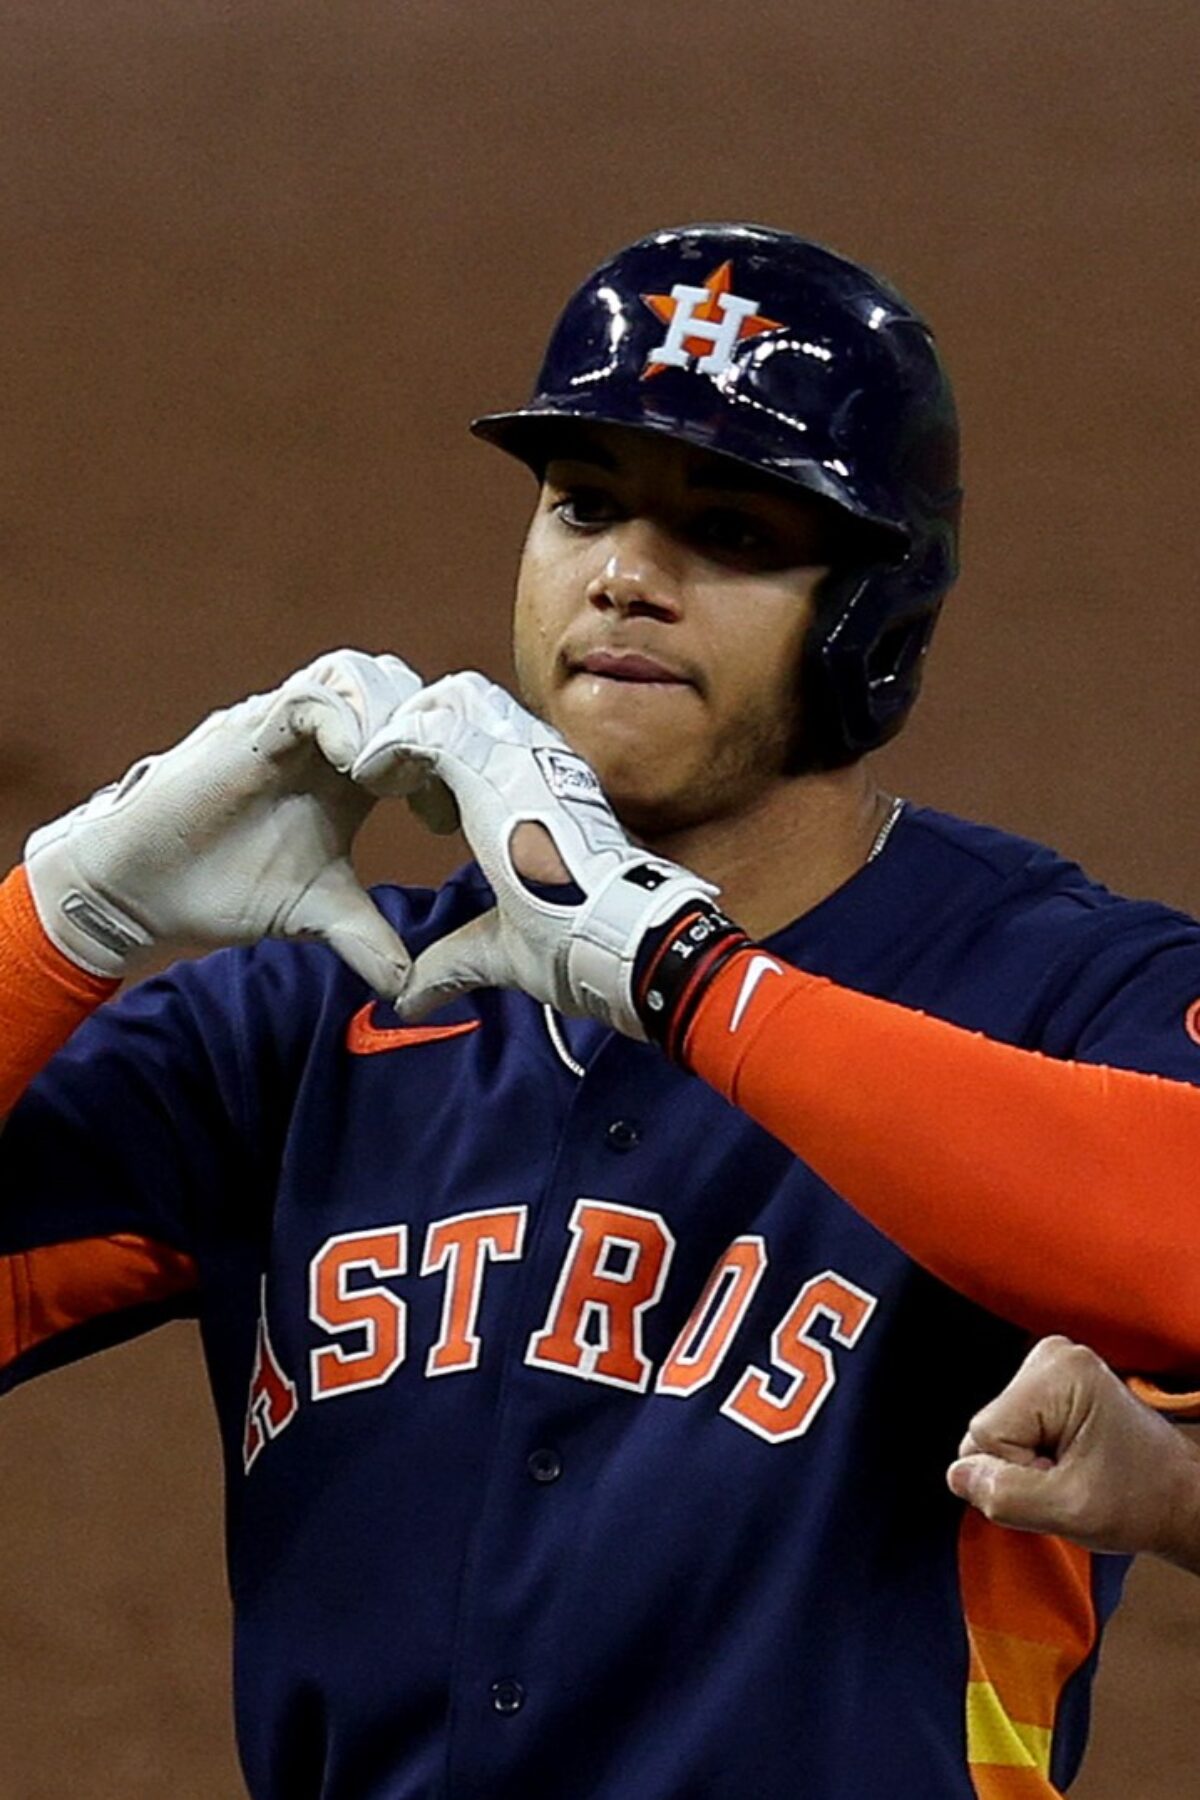 HOUSTON, TEXAS - OCTOBER 20: Jeremy Pena #3 of the Houston Astros reacts after his single against the New York Yankees during the third inning in game two of the American League Championship Series at Minute Maid Park on October 20, 2022 in Houston, Texas. (Photo by Rob Carr/Getty Images)